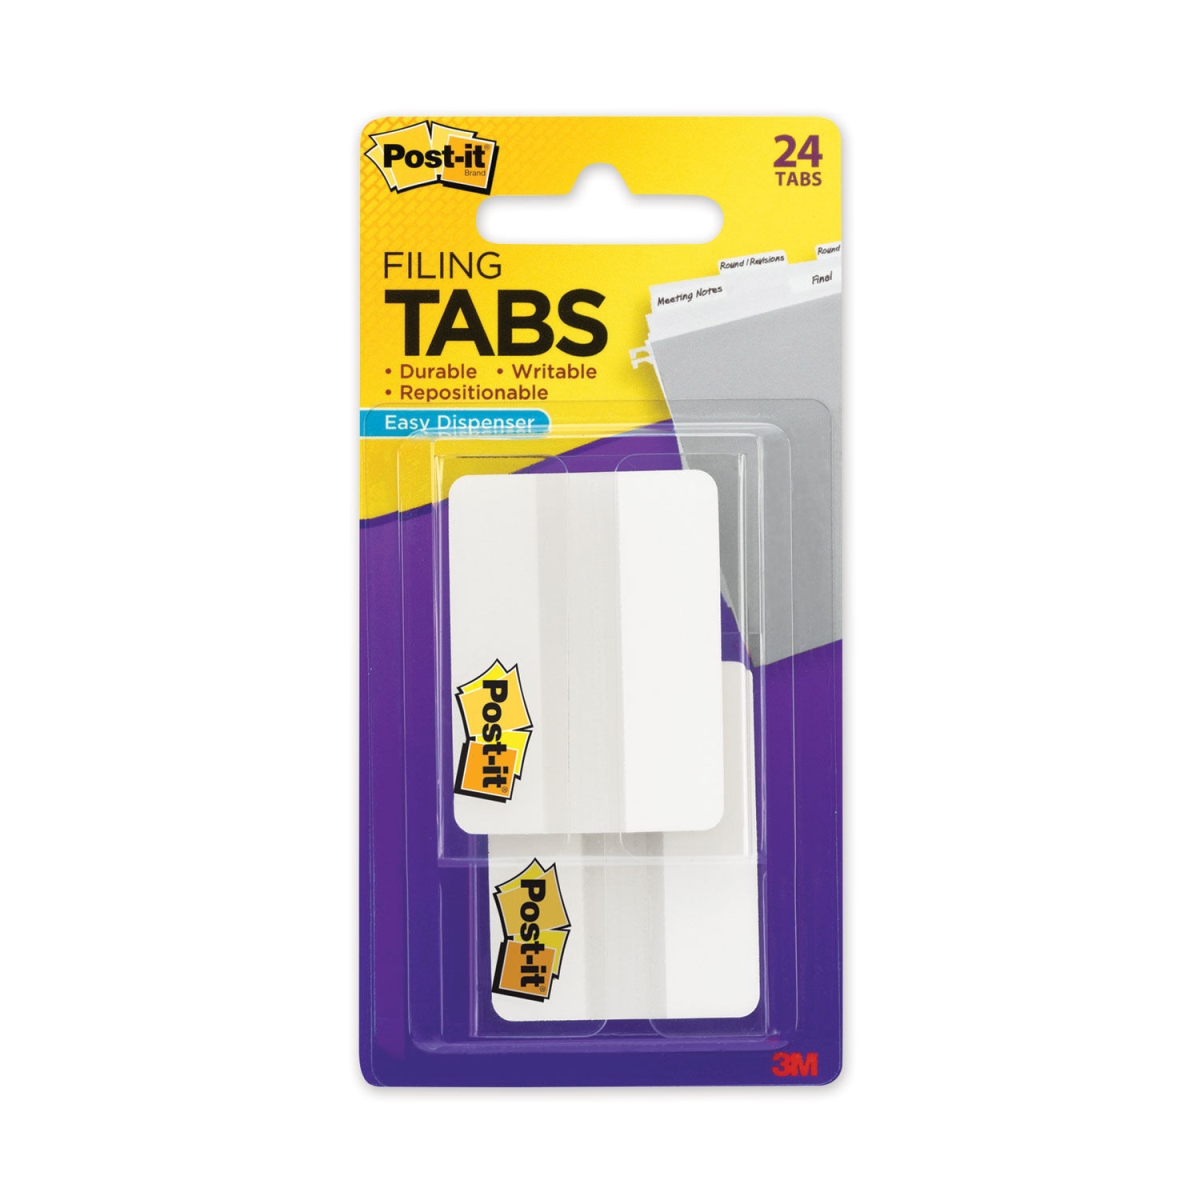 3M 686-24WE 2 x 0.5 in. Sticky Flag - Durable White Filing Cut Tabs, White - Pack of 24